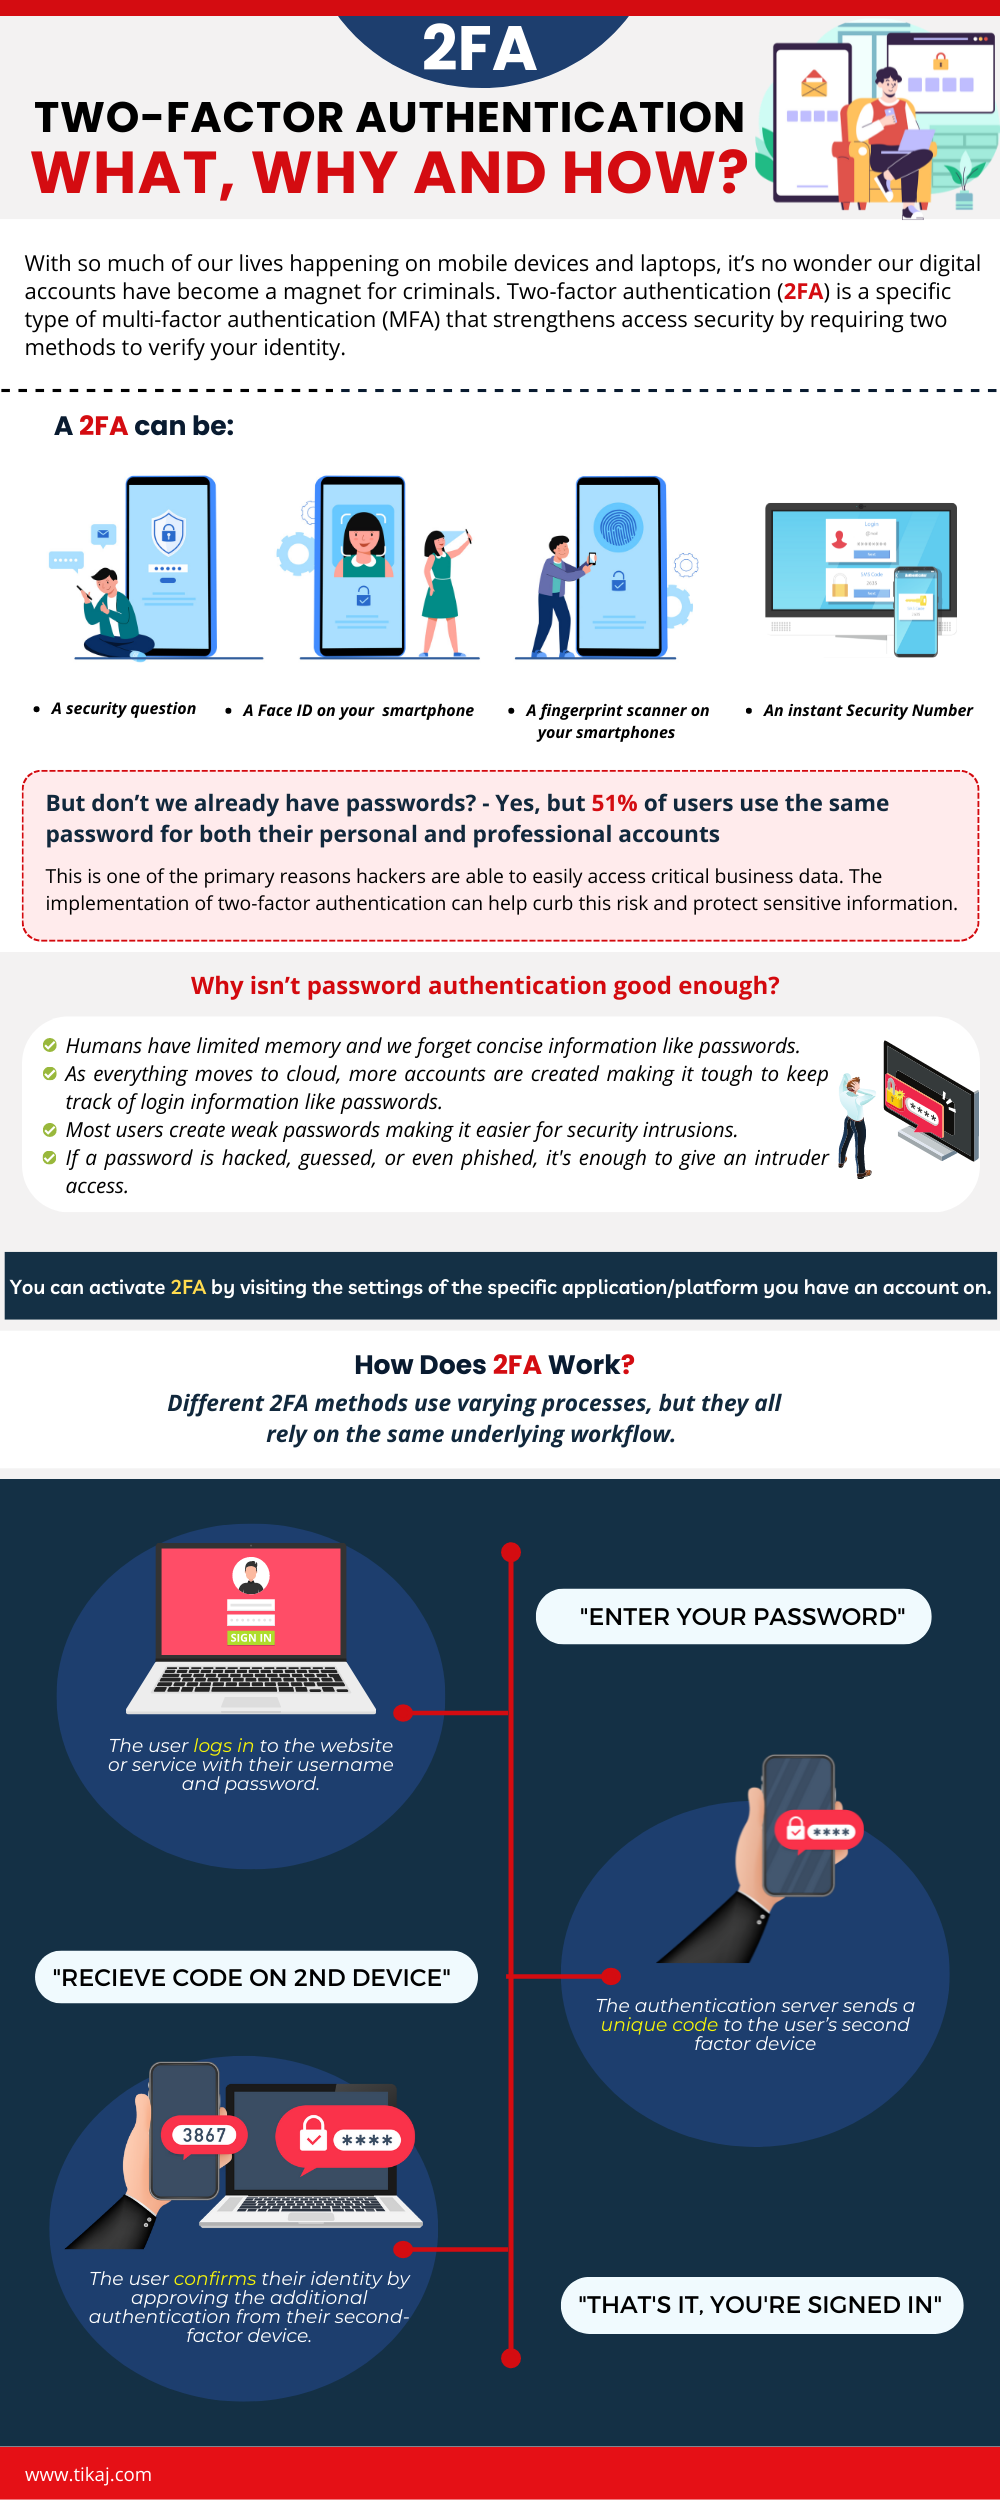 Infographic illustrating the concept of 2FA, with a diagram showing the two different factors needed to authenticate an account